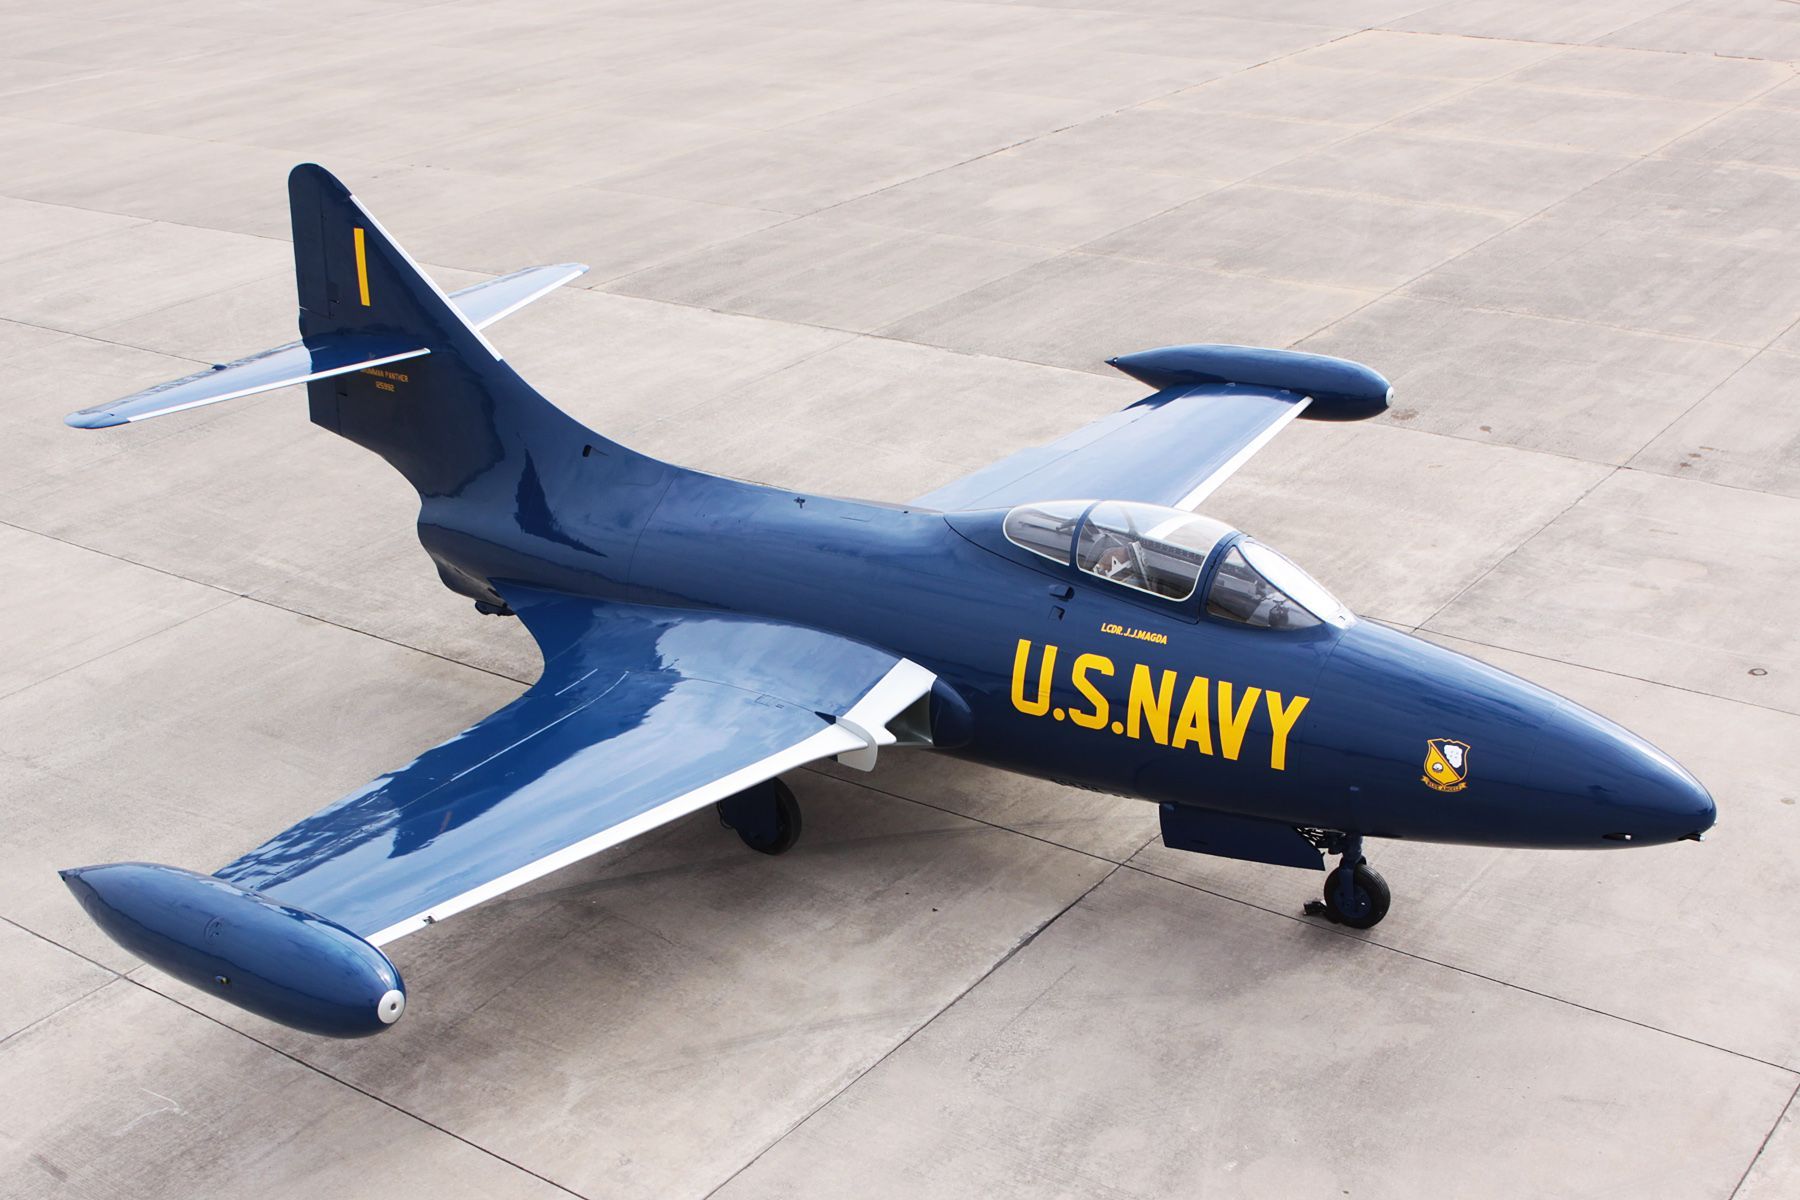 1st Jet plane of the Blue Angels